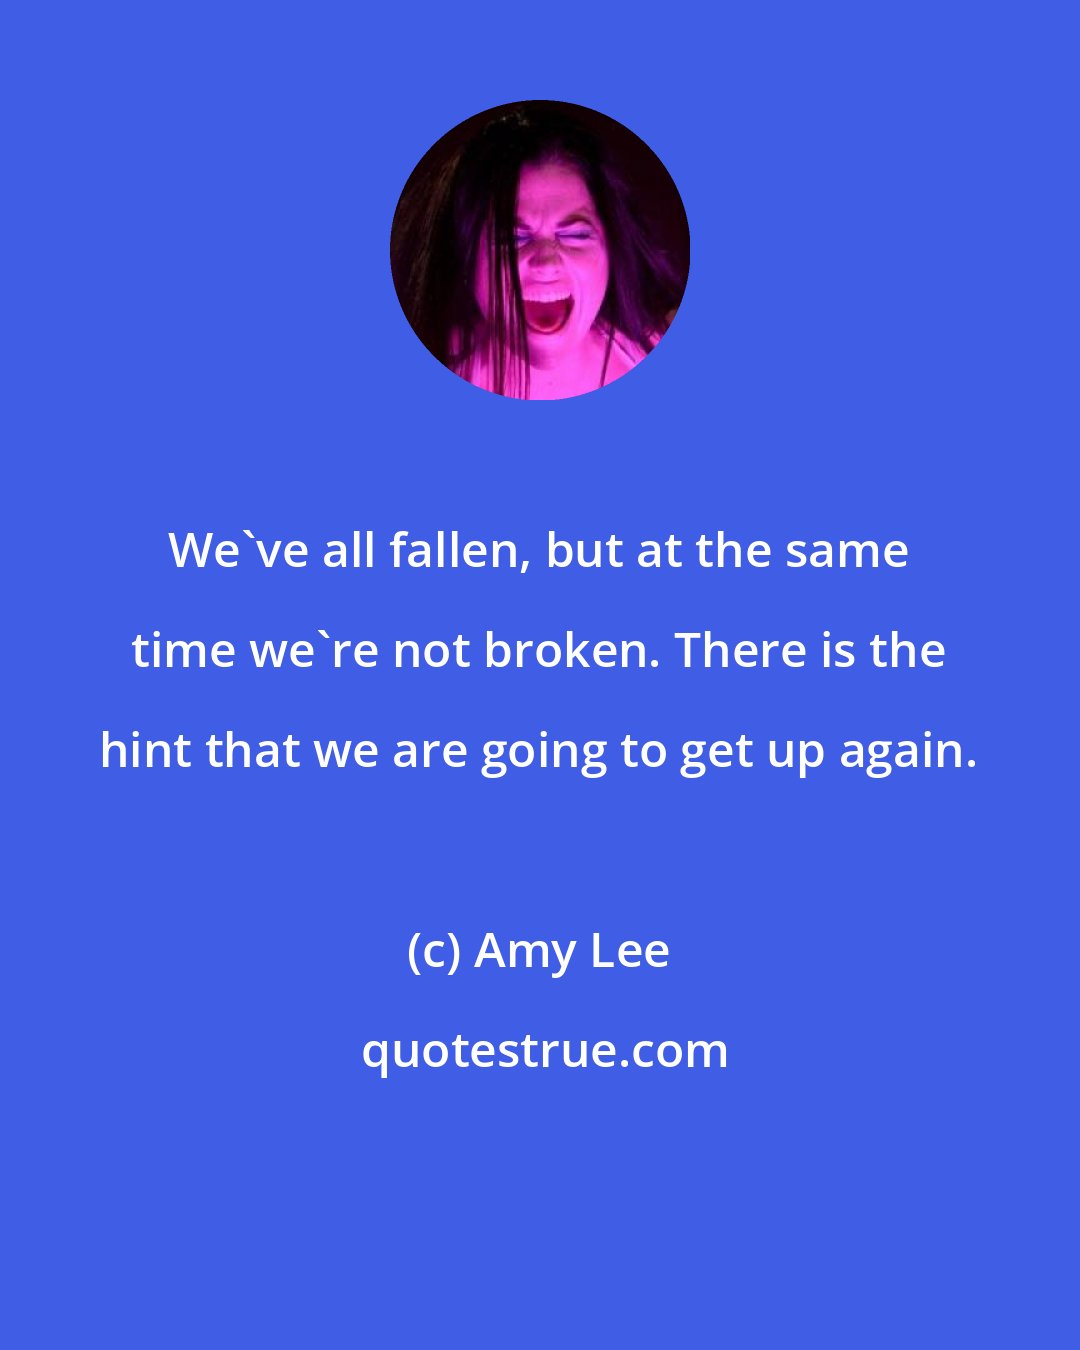 Amy Lee: We've all fallen, but at the same time we're not broken. There is the hint that we are going to get up again.